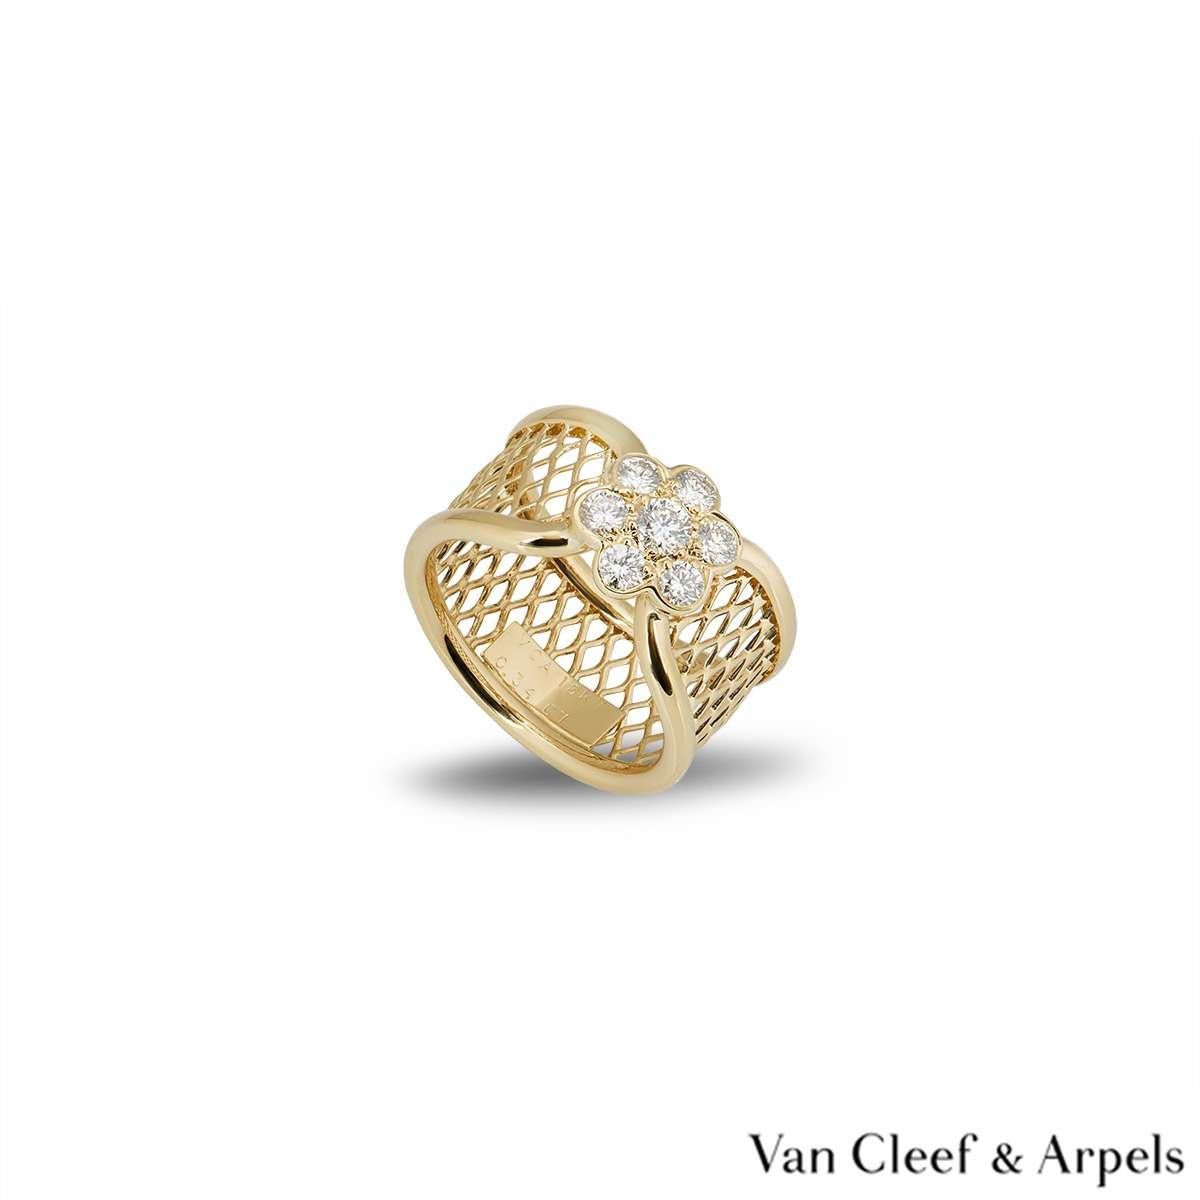 A beautiful 18k yellow gold ring from the Fleurette collection by Van Cleef & Arpels. The mesh design ring has a diamond set flower motif in the centre. There are 7 round brilliant cut diamonds totalling 0.34ct. The ring measures 1cm in width and is